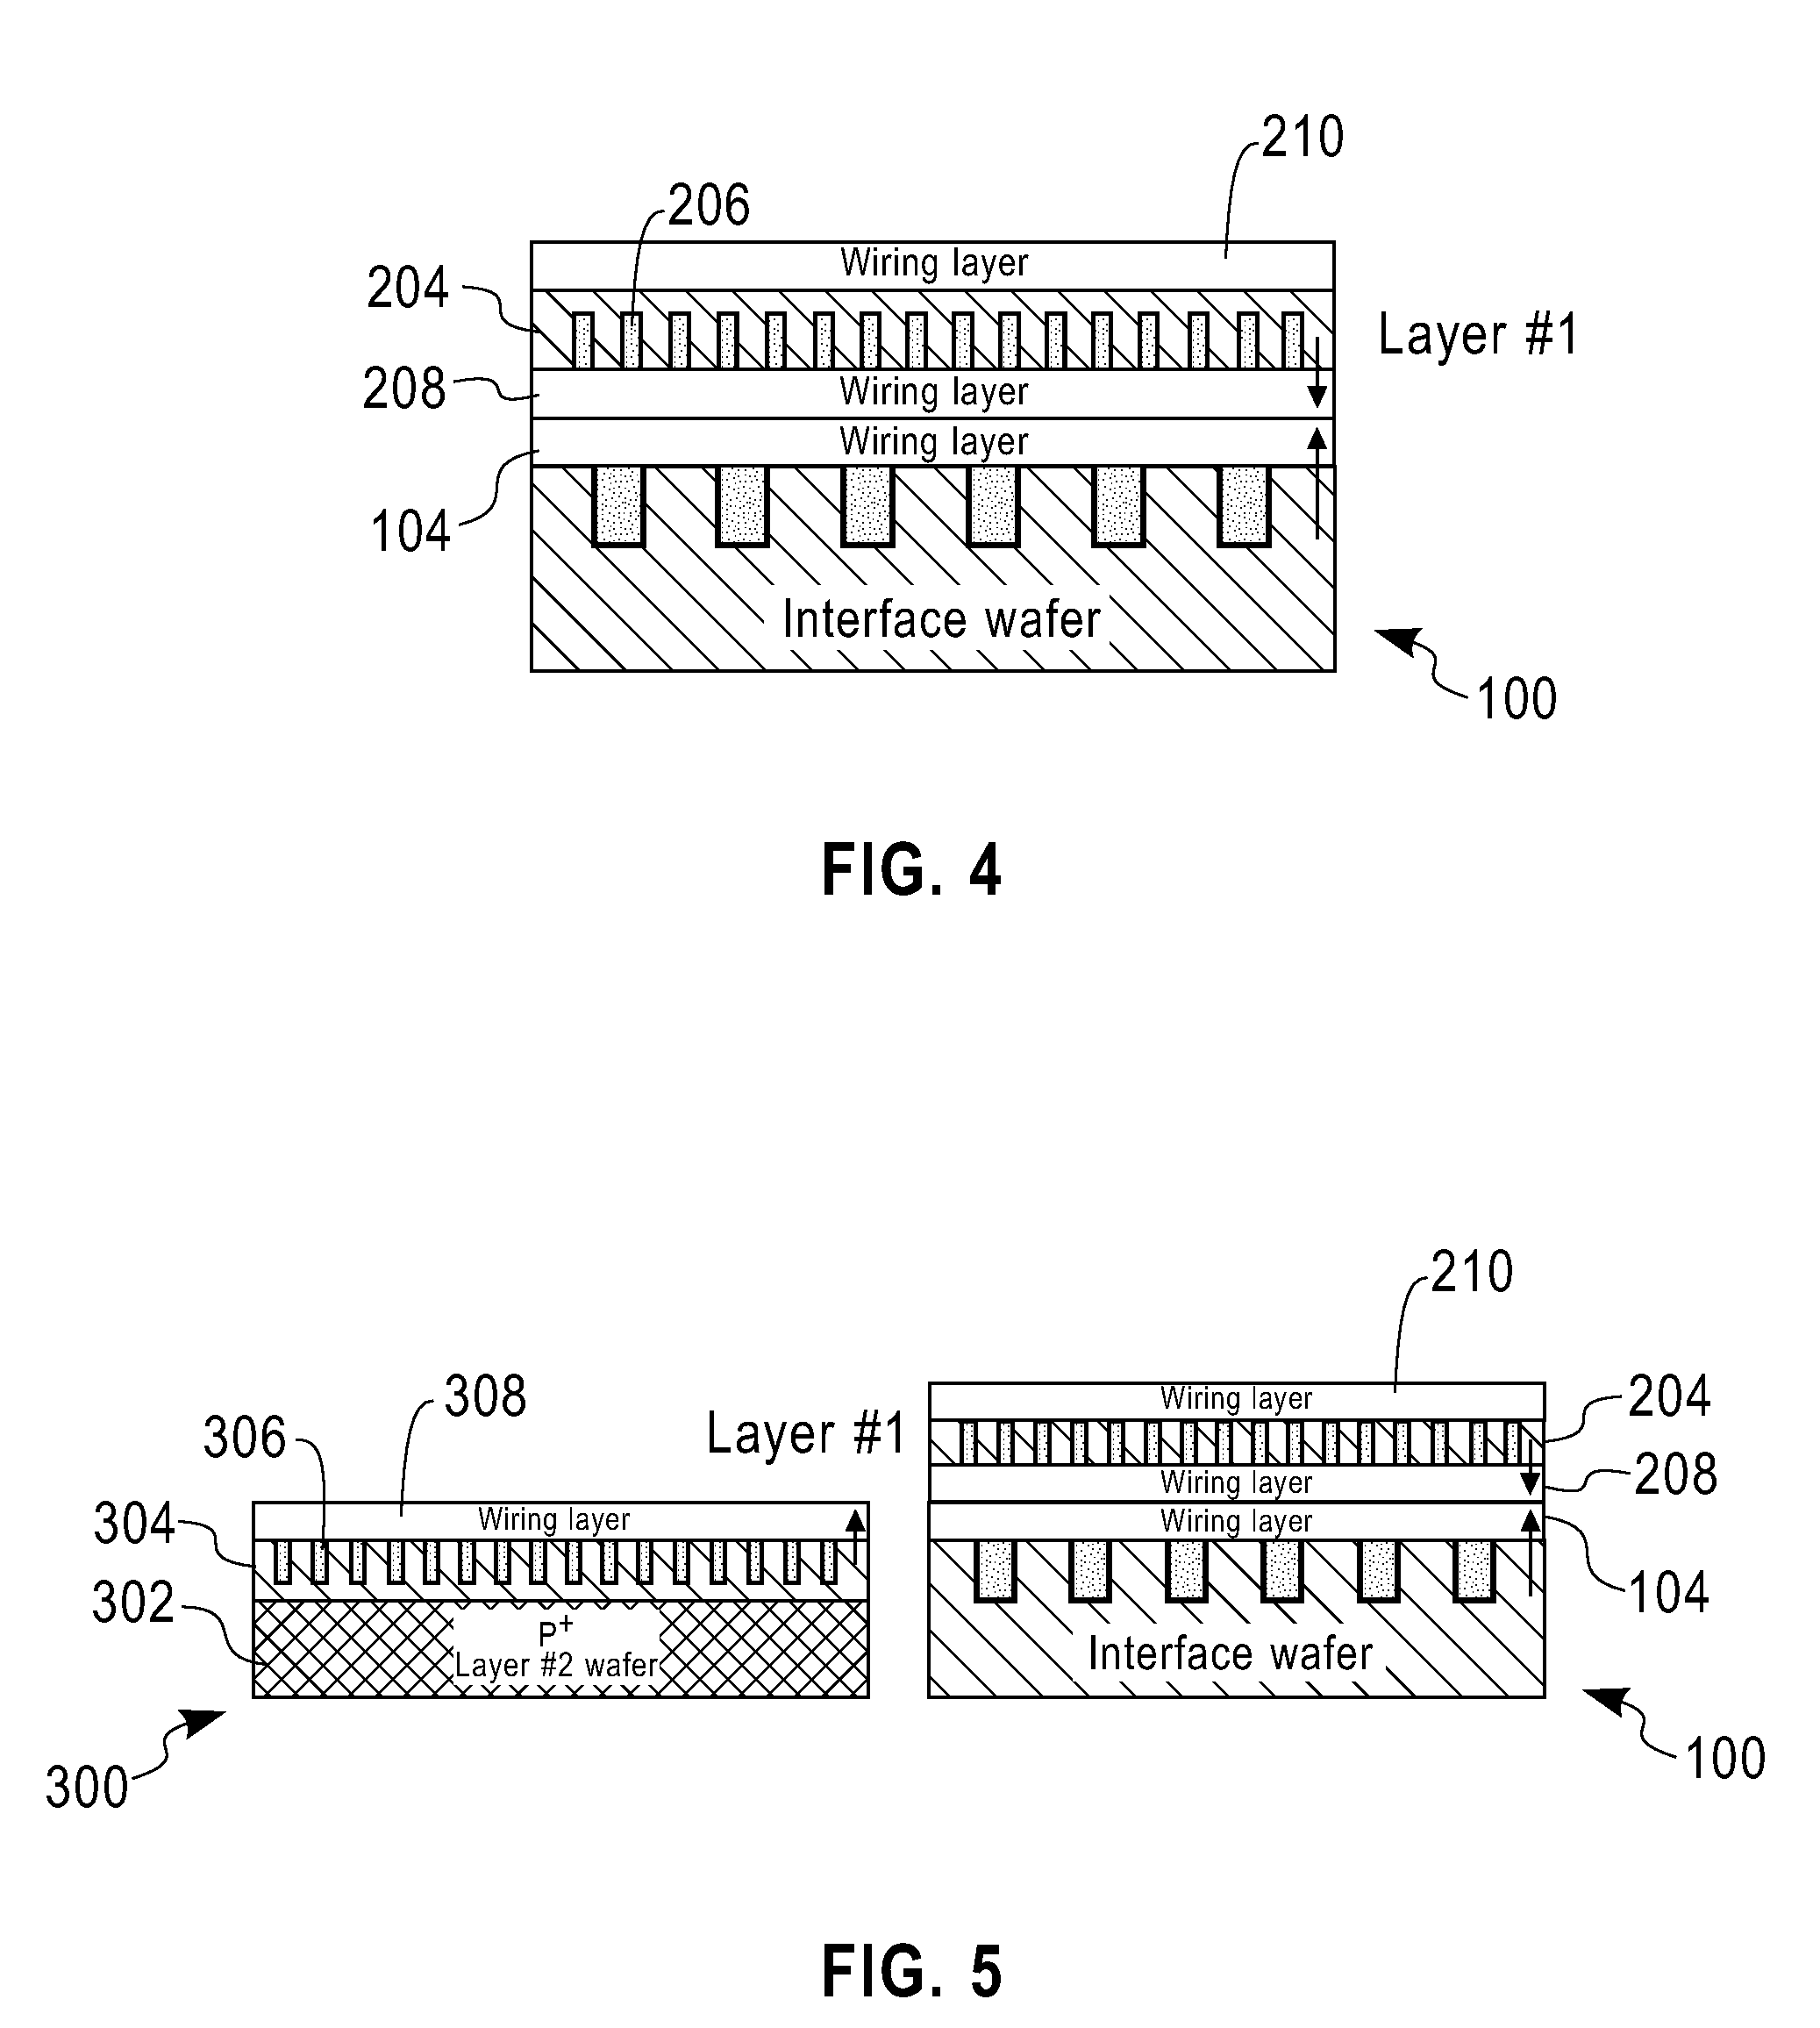 3D integrated circuit device fabrication using interface wafer as permanent carrier